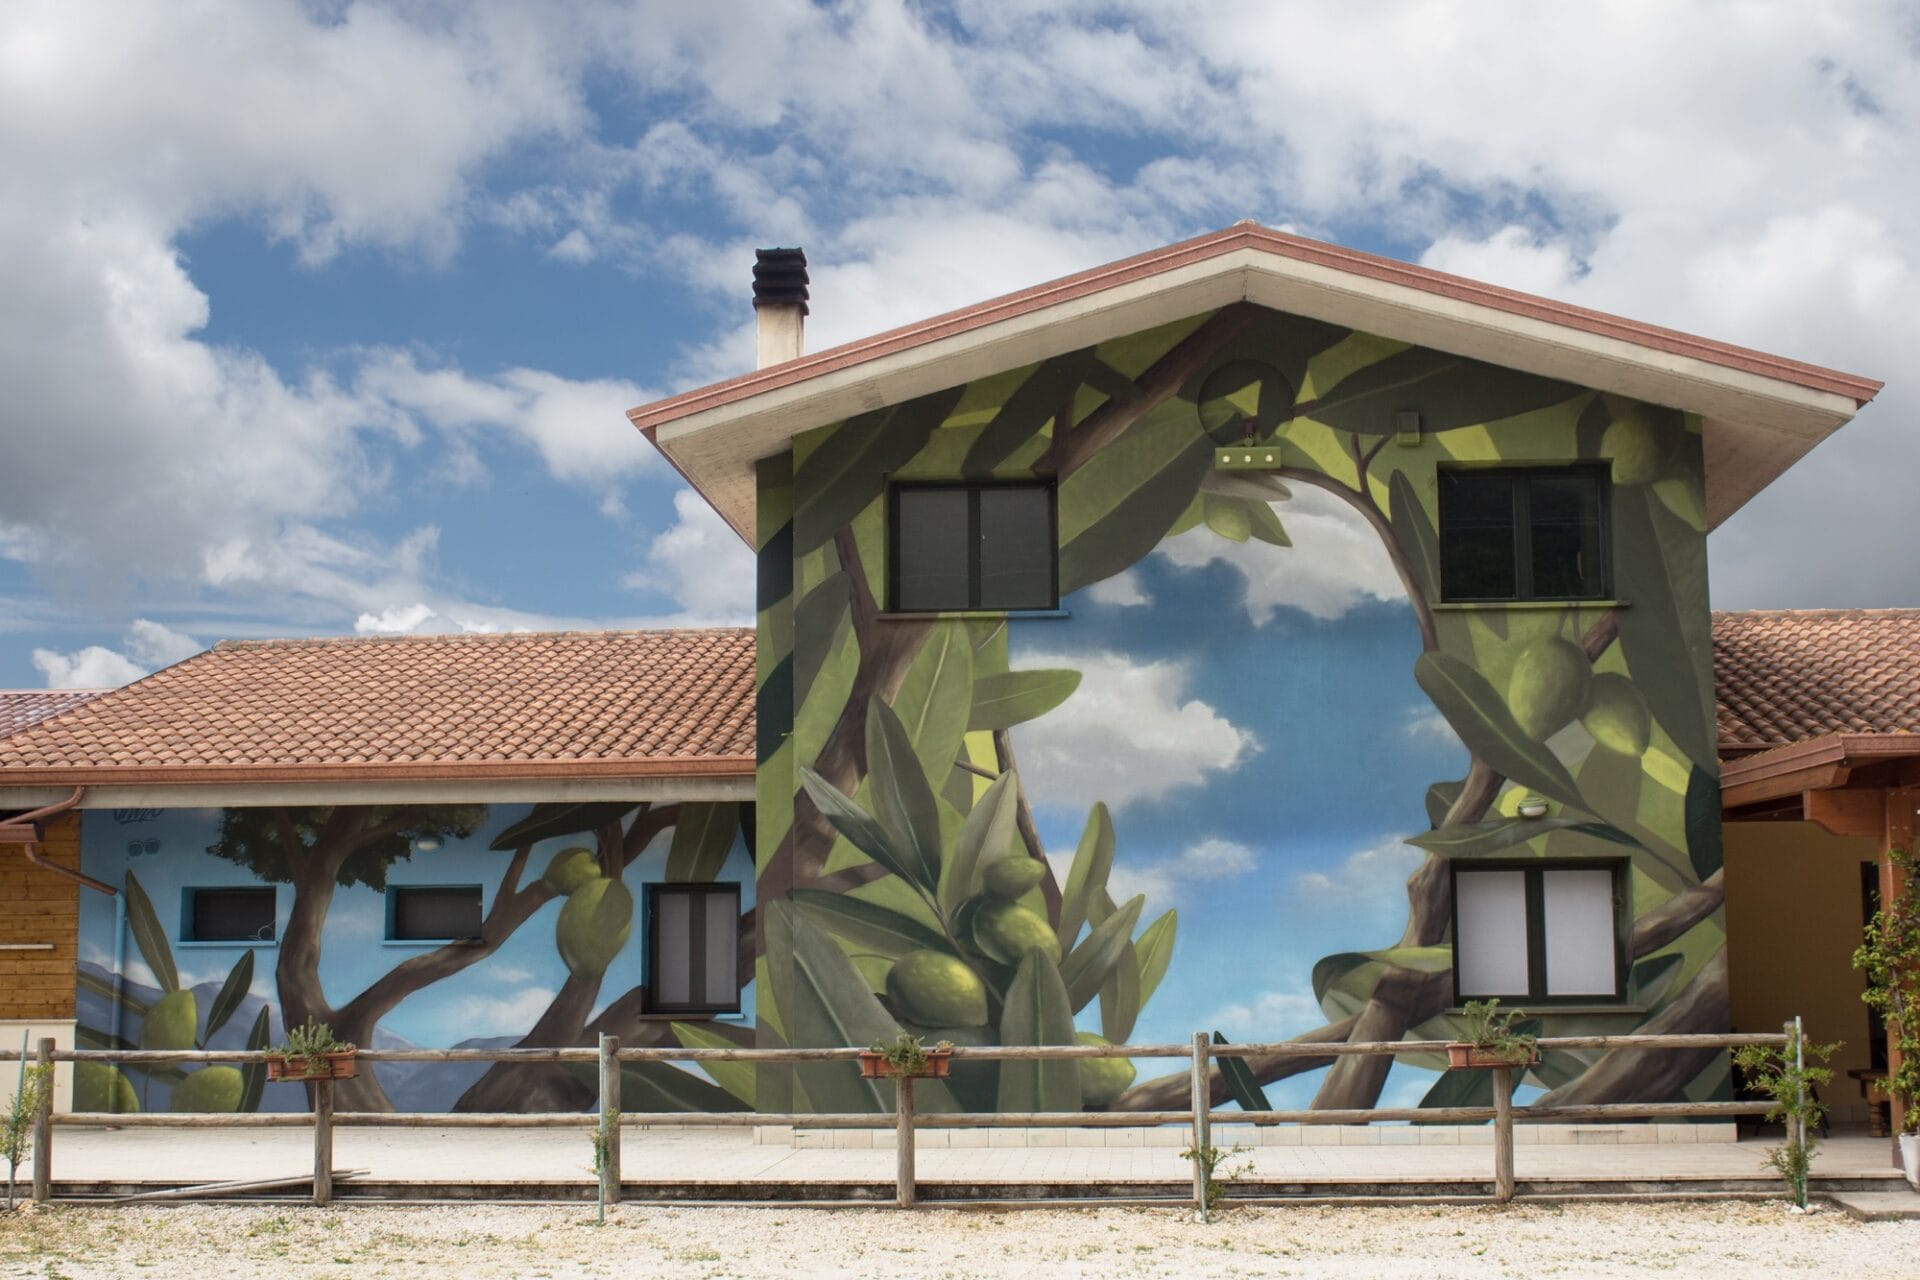 a mural of olive branches on the side of a building, which open up to reveal blue sky in the shape of a person's profile